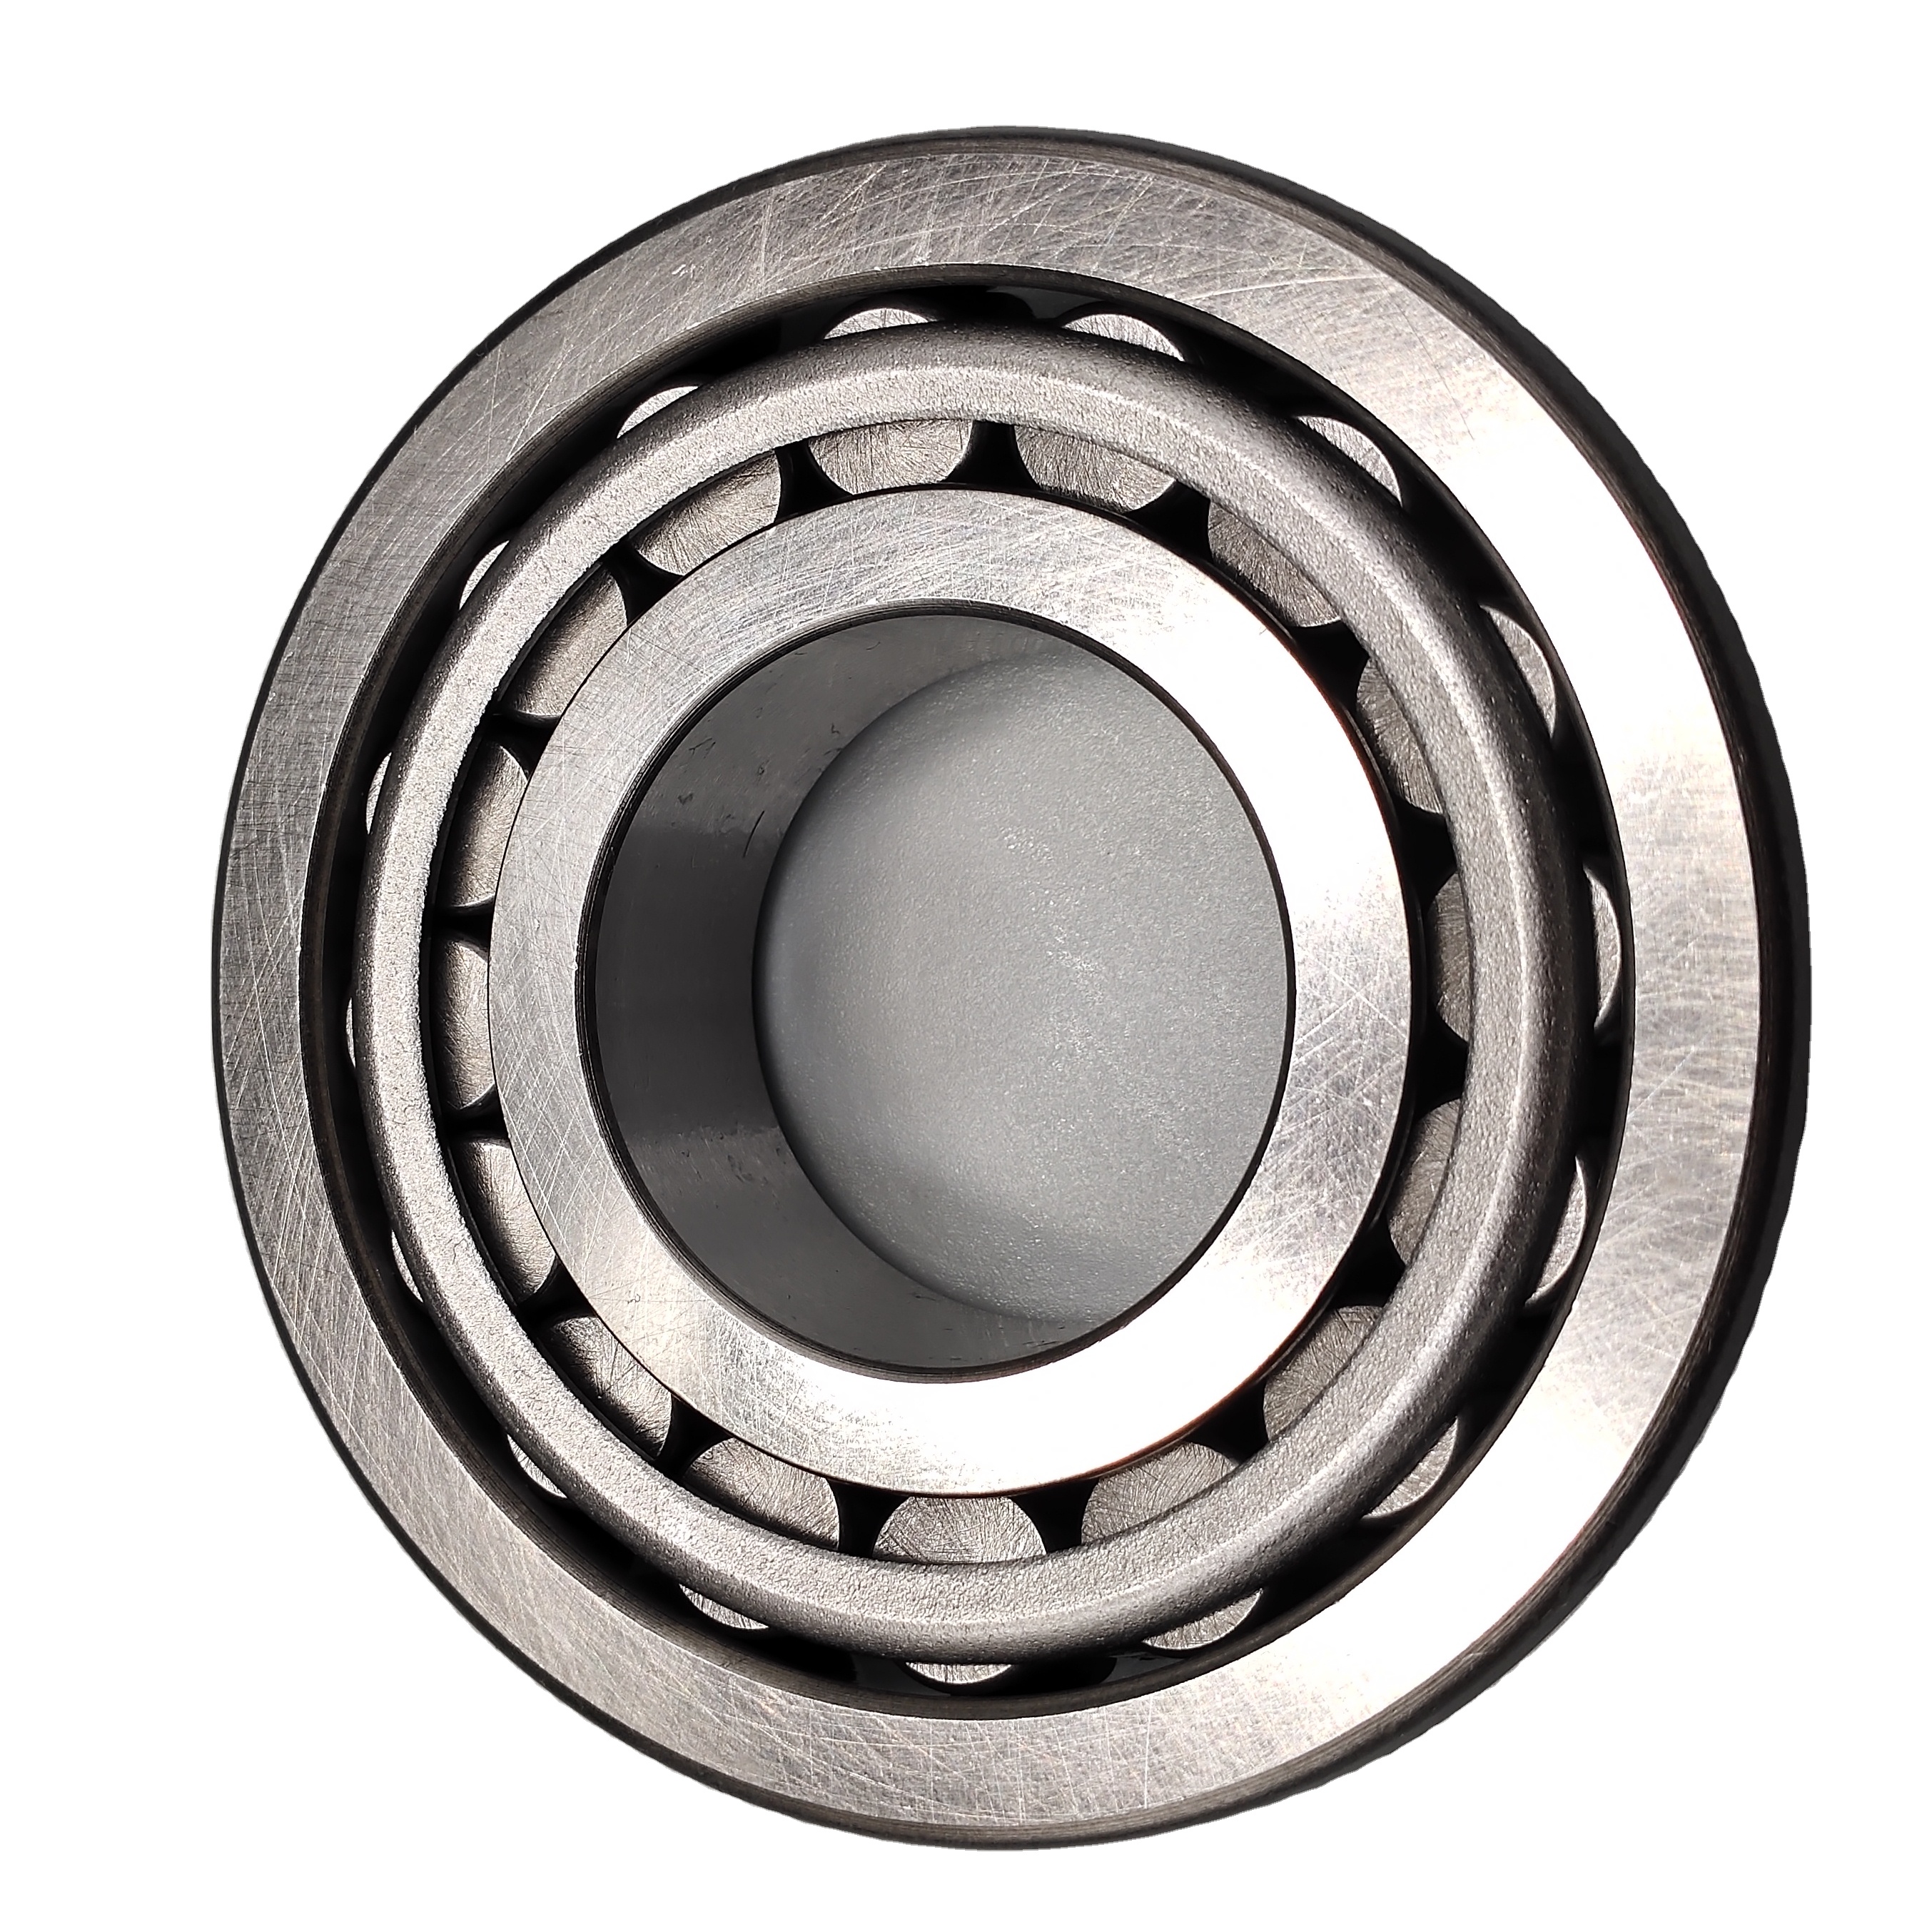 Hot-selling 8mm Od Bearing - Taper Roller Bearing 32200 Series – Shining Industry